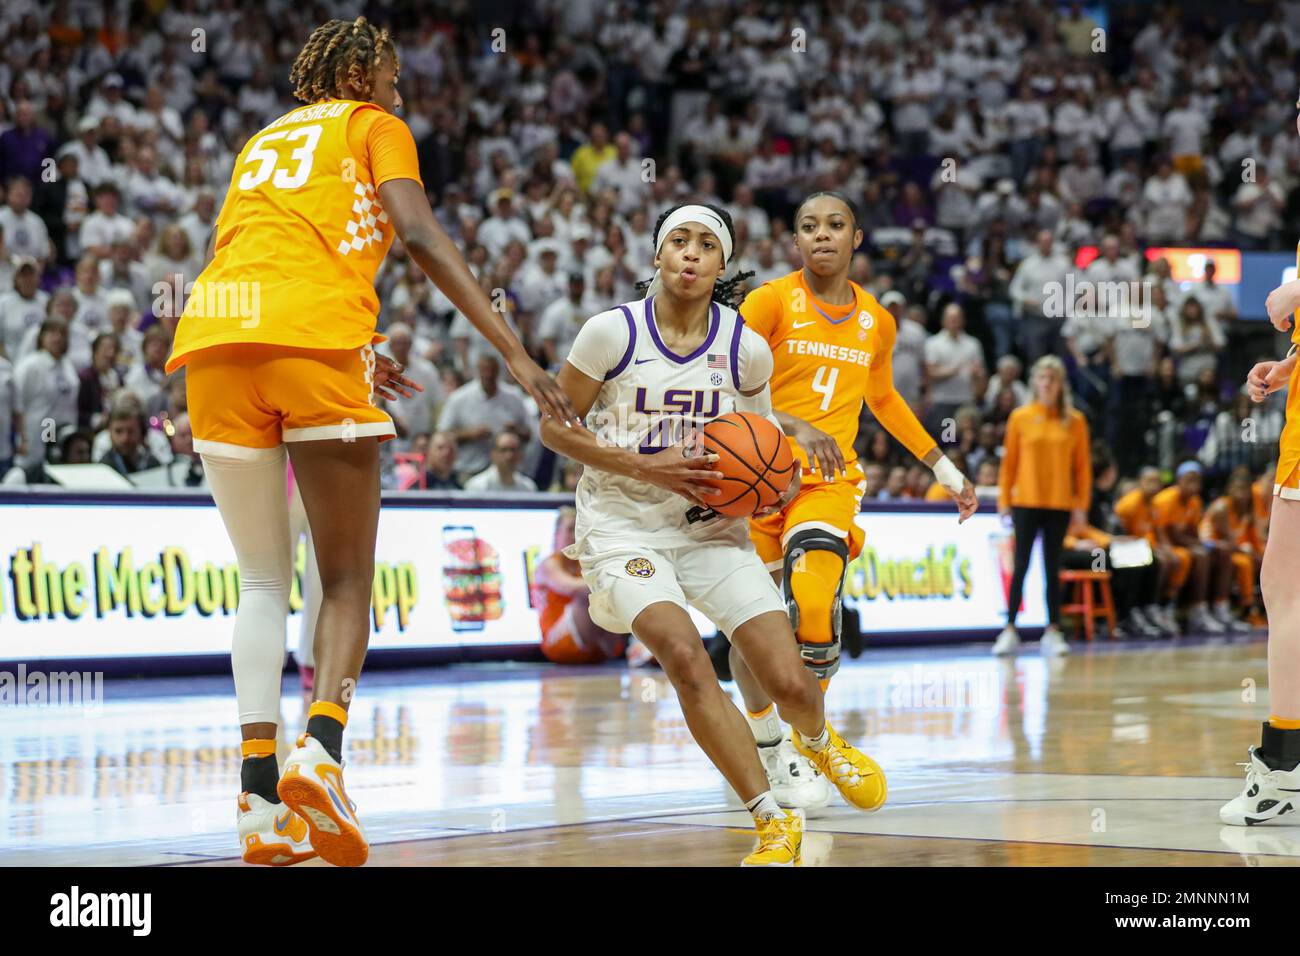 Baton Rouge, LA, USA. 30th Jan, 2023. LSU's Alexis Morris (45) tries to dribble around Tennessee's Jillian Hollingshead (53) during NCAA Women's Basketball action between the Tennessee Volunteers and the LSU Tigers at the Pete Maravich Assembly Center in Baton Rouge, LA. Jonathan Mailhes/CSM/Alamy Live News Stock Photo